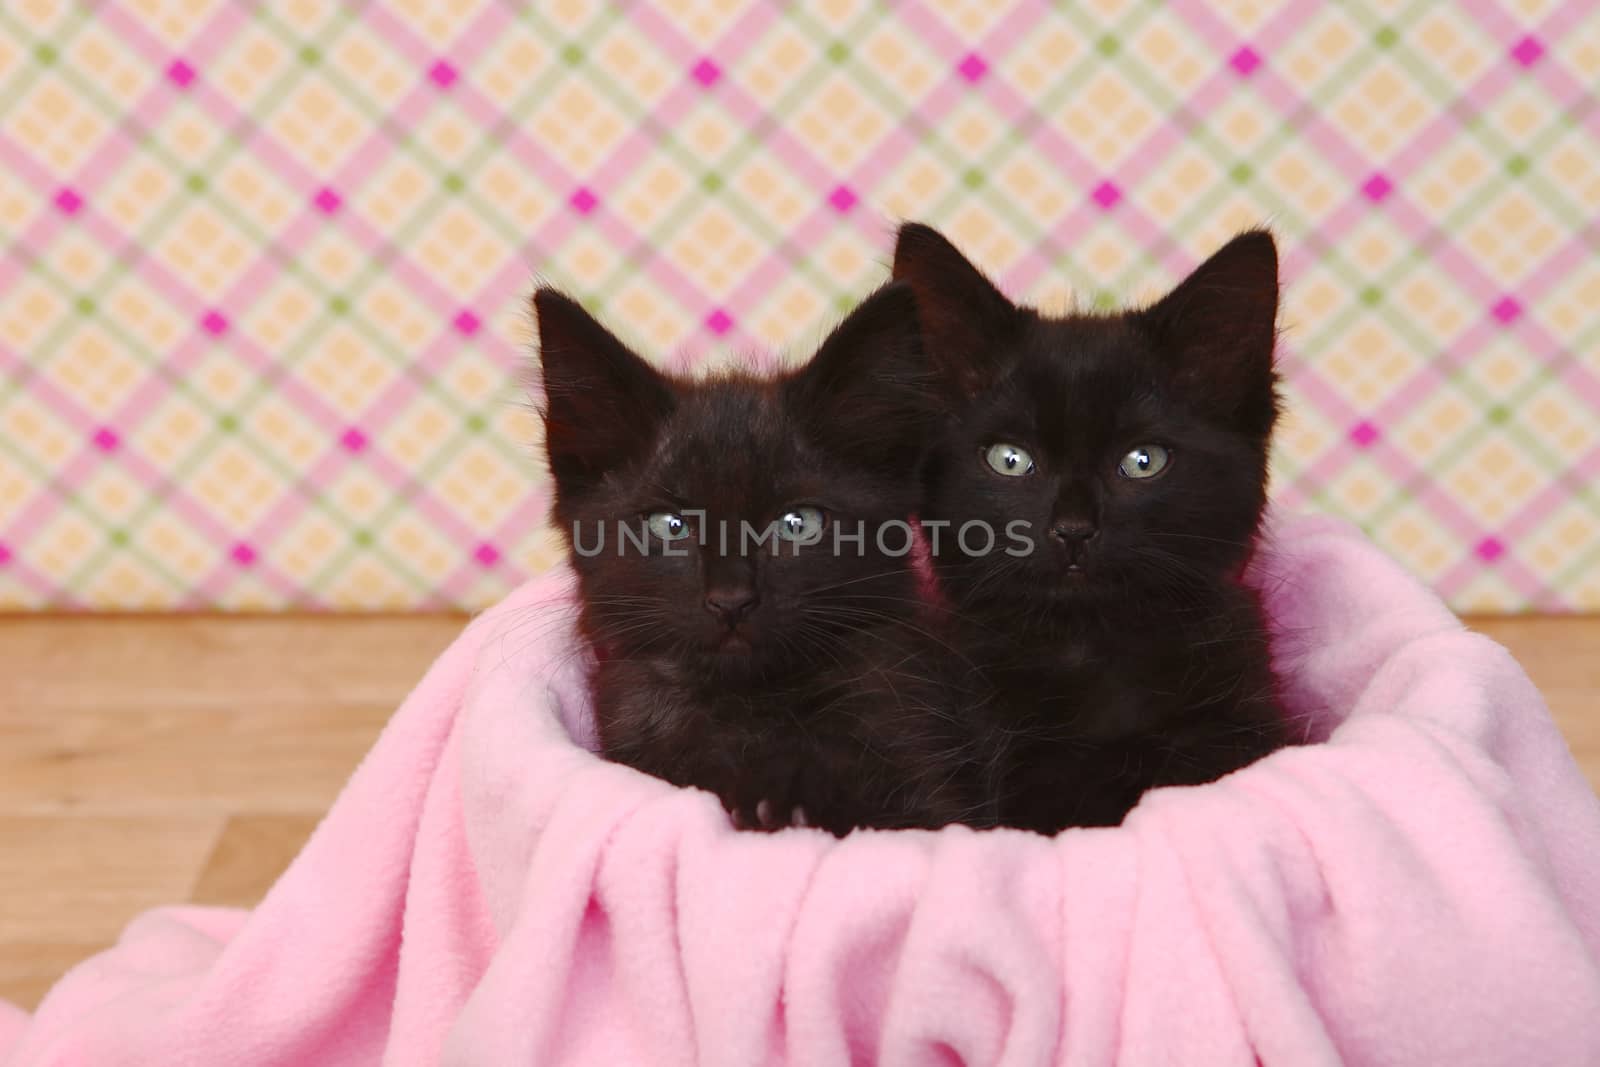 Cute Black Kittens on Pink Pretty Background by tobkatrina